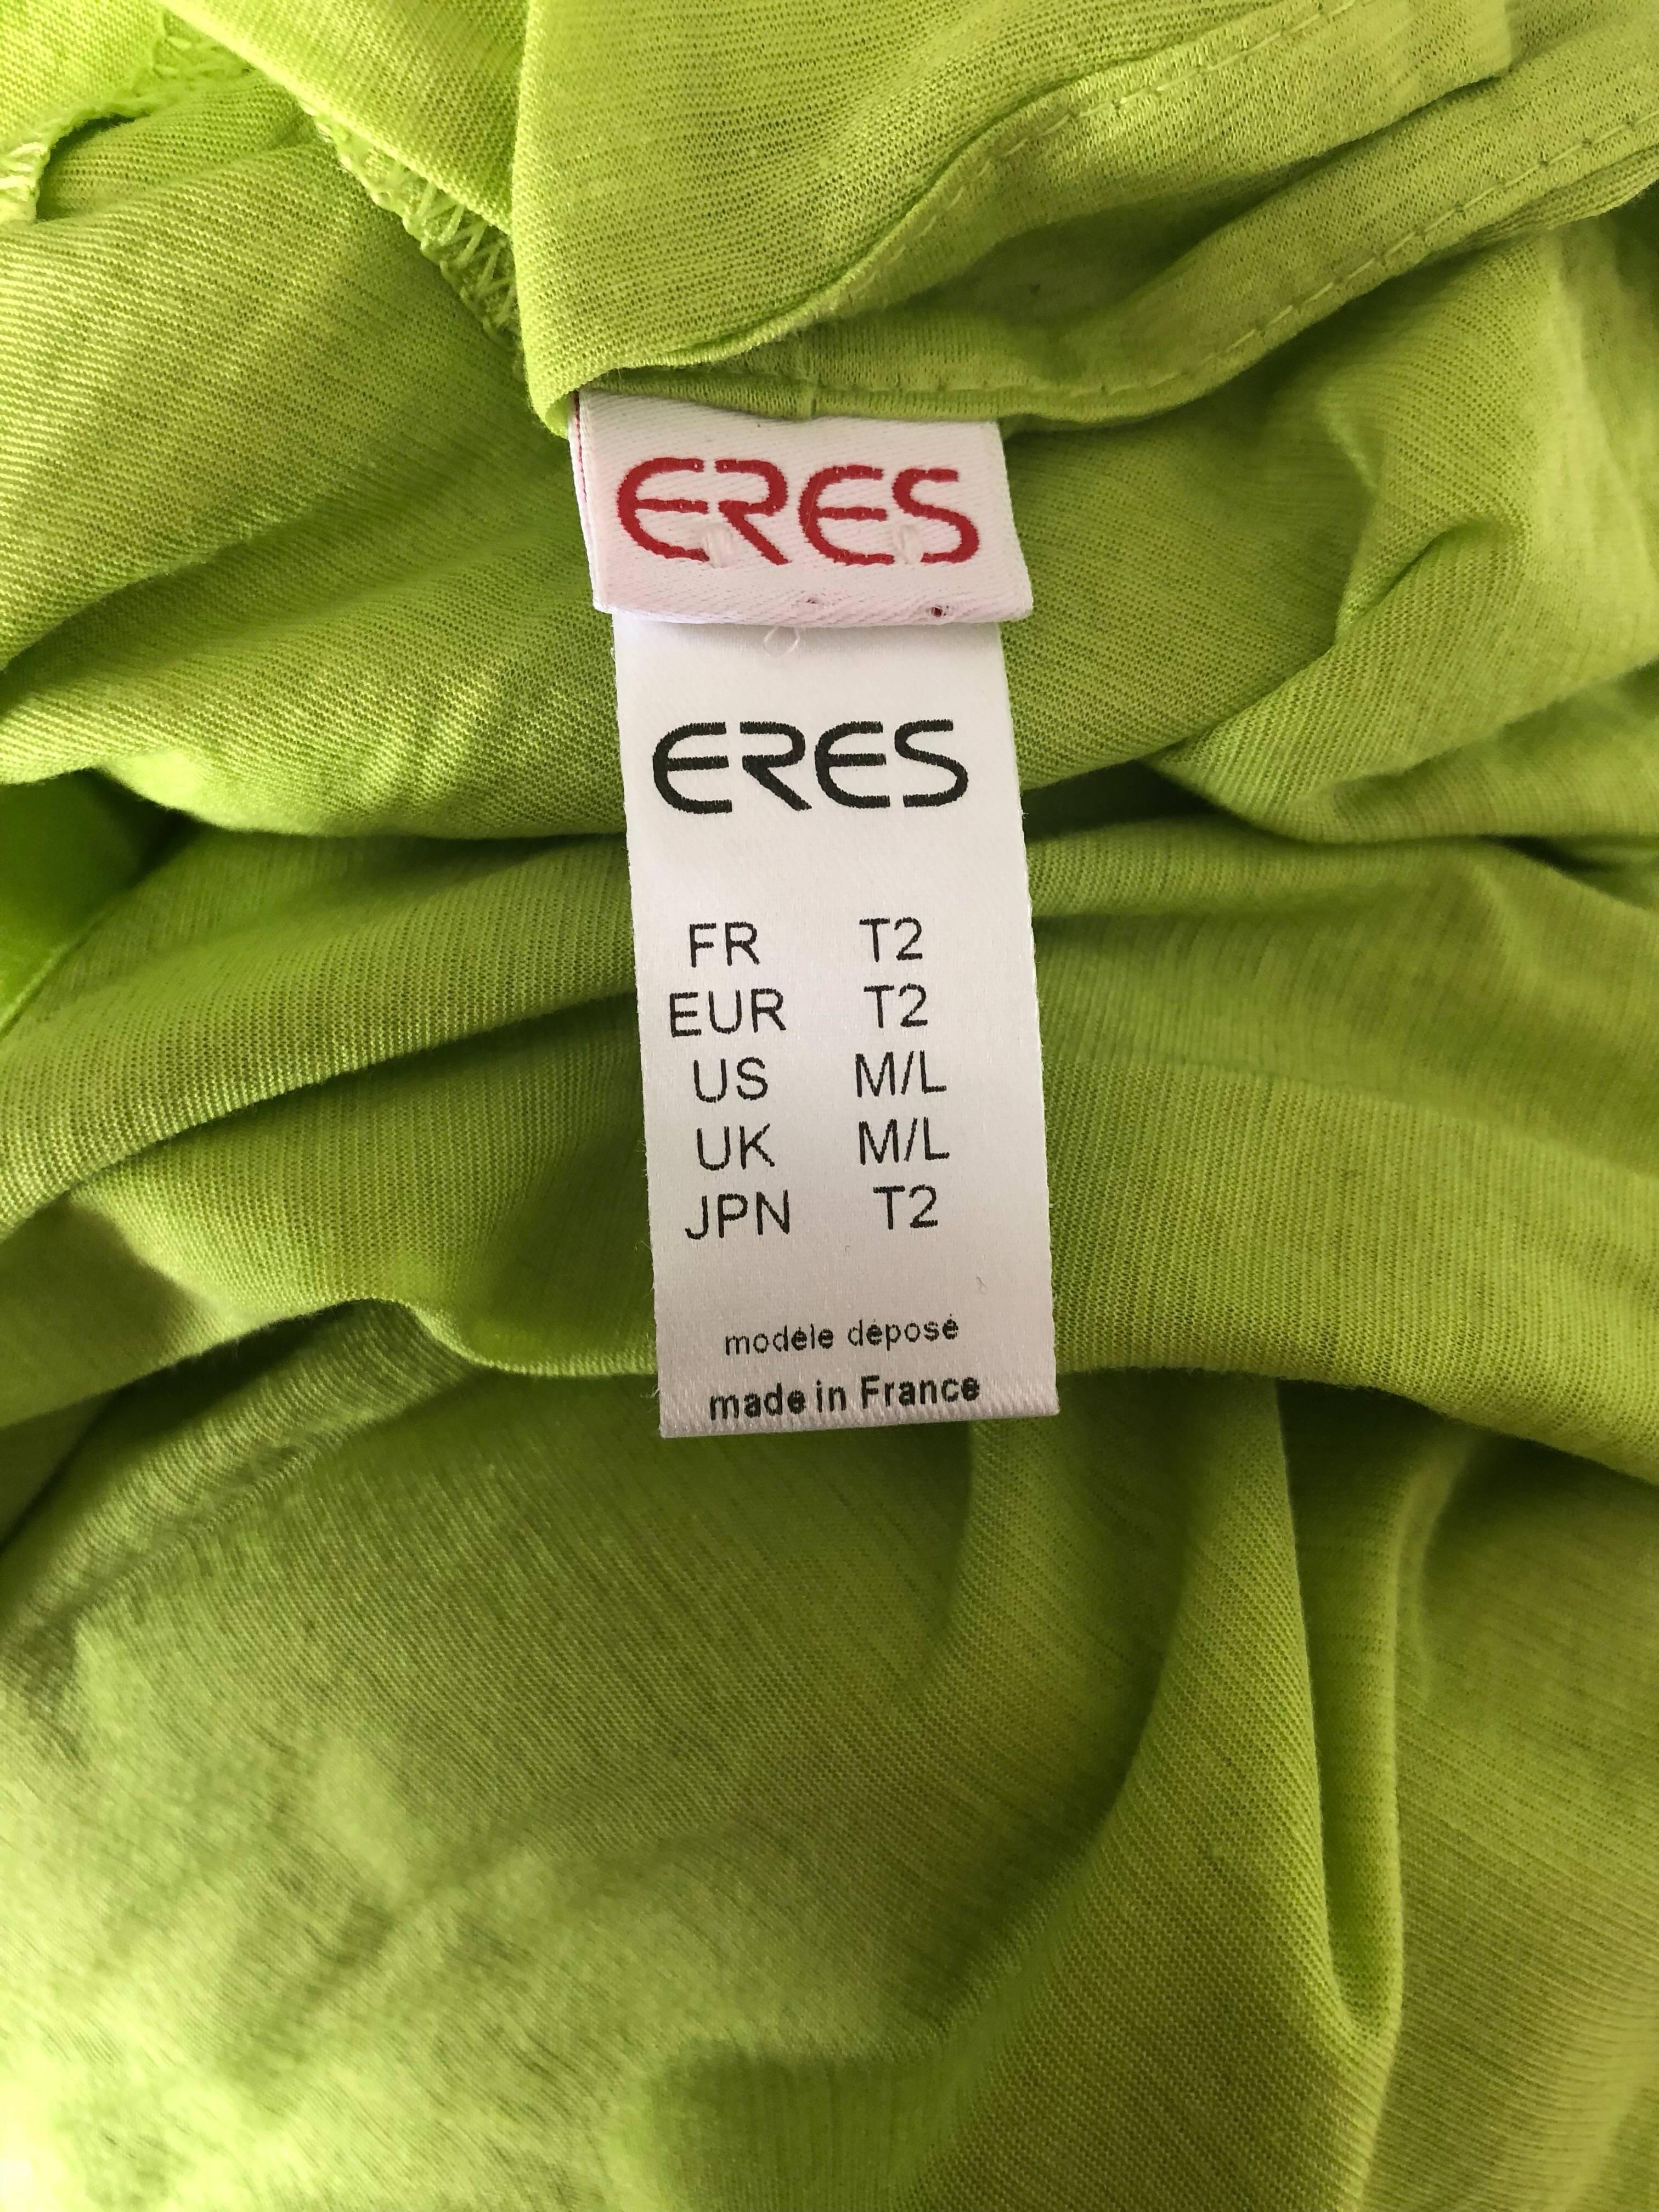 Eres Large Size French Lime Green Cotton One Shoulder Cotton Blouse Top, 1990  For Sale 3